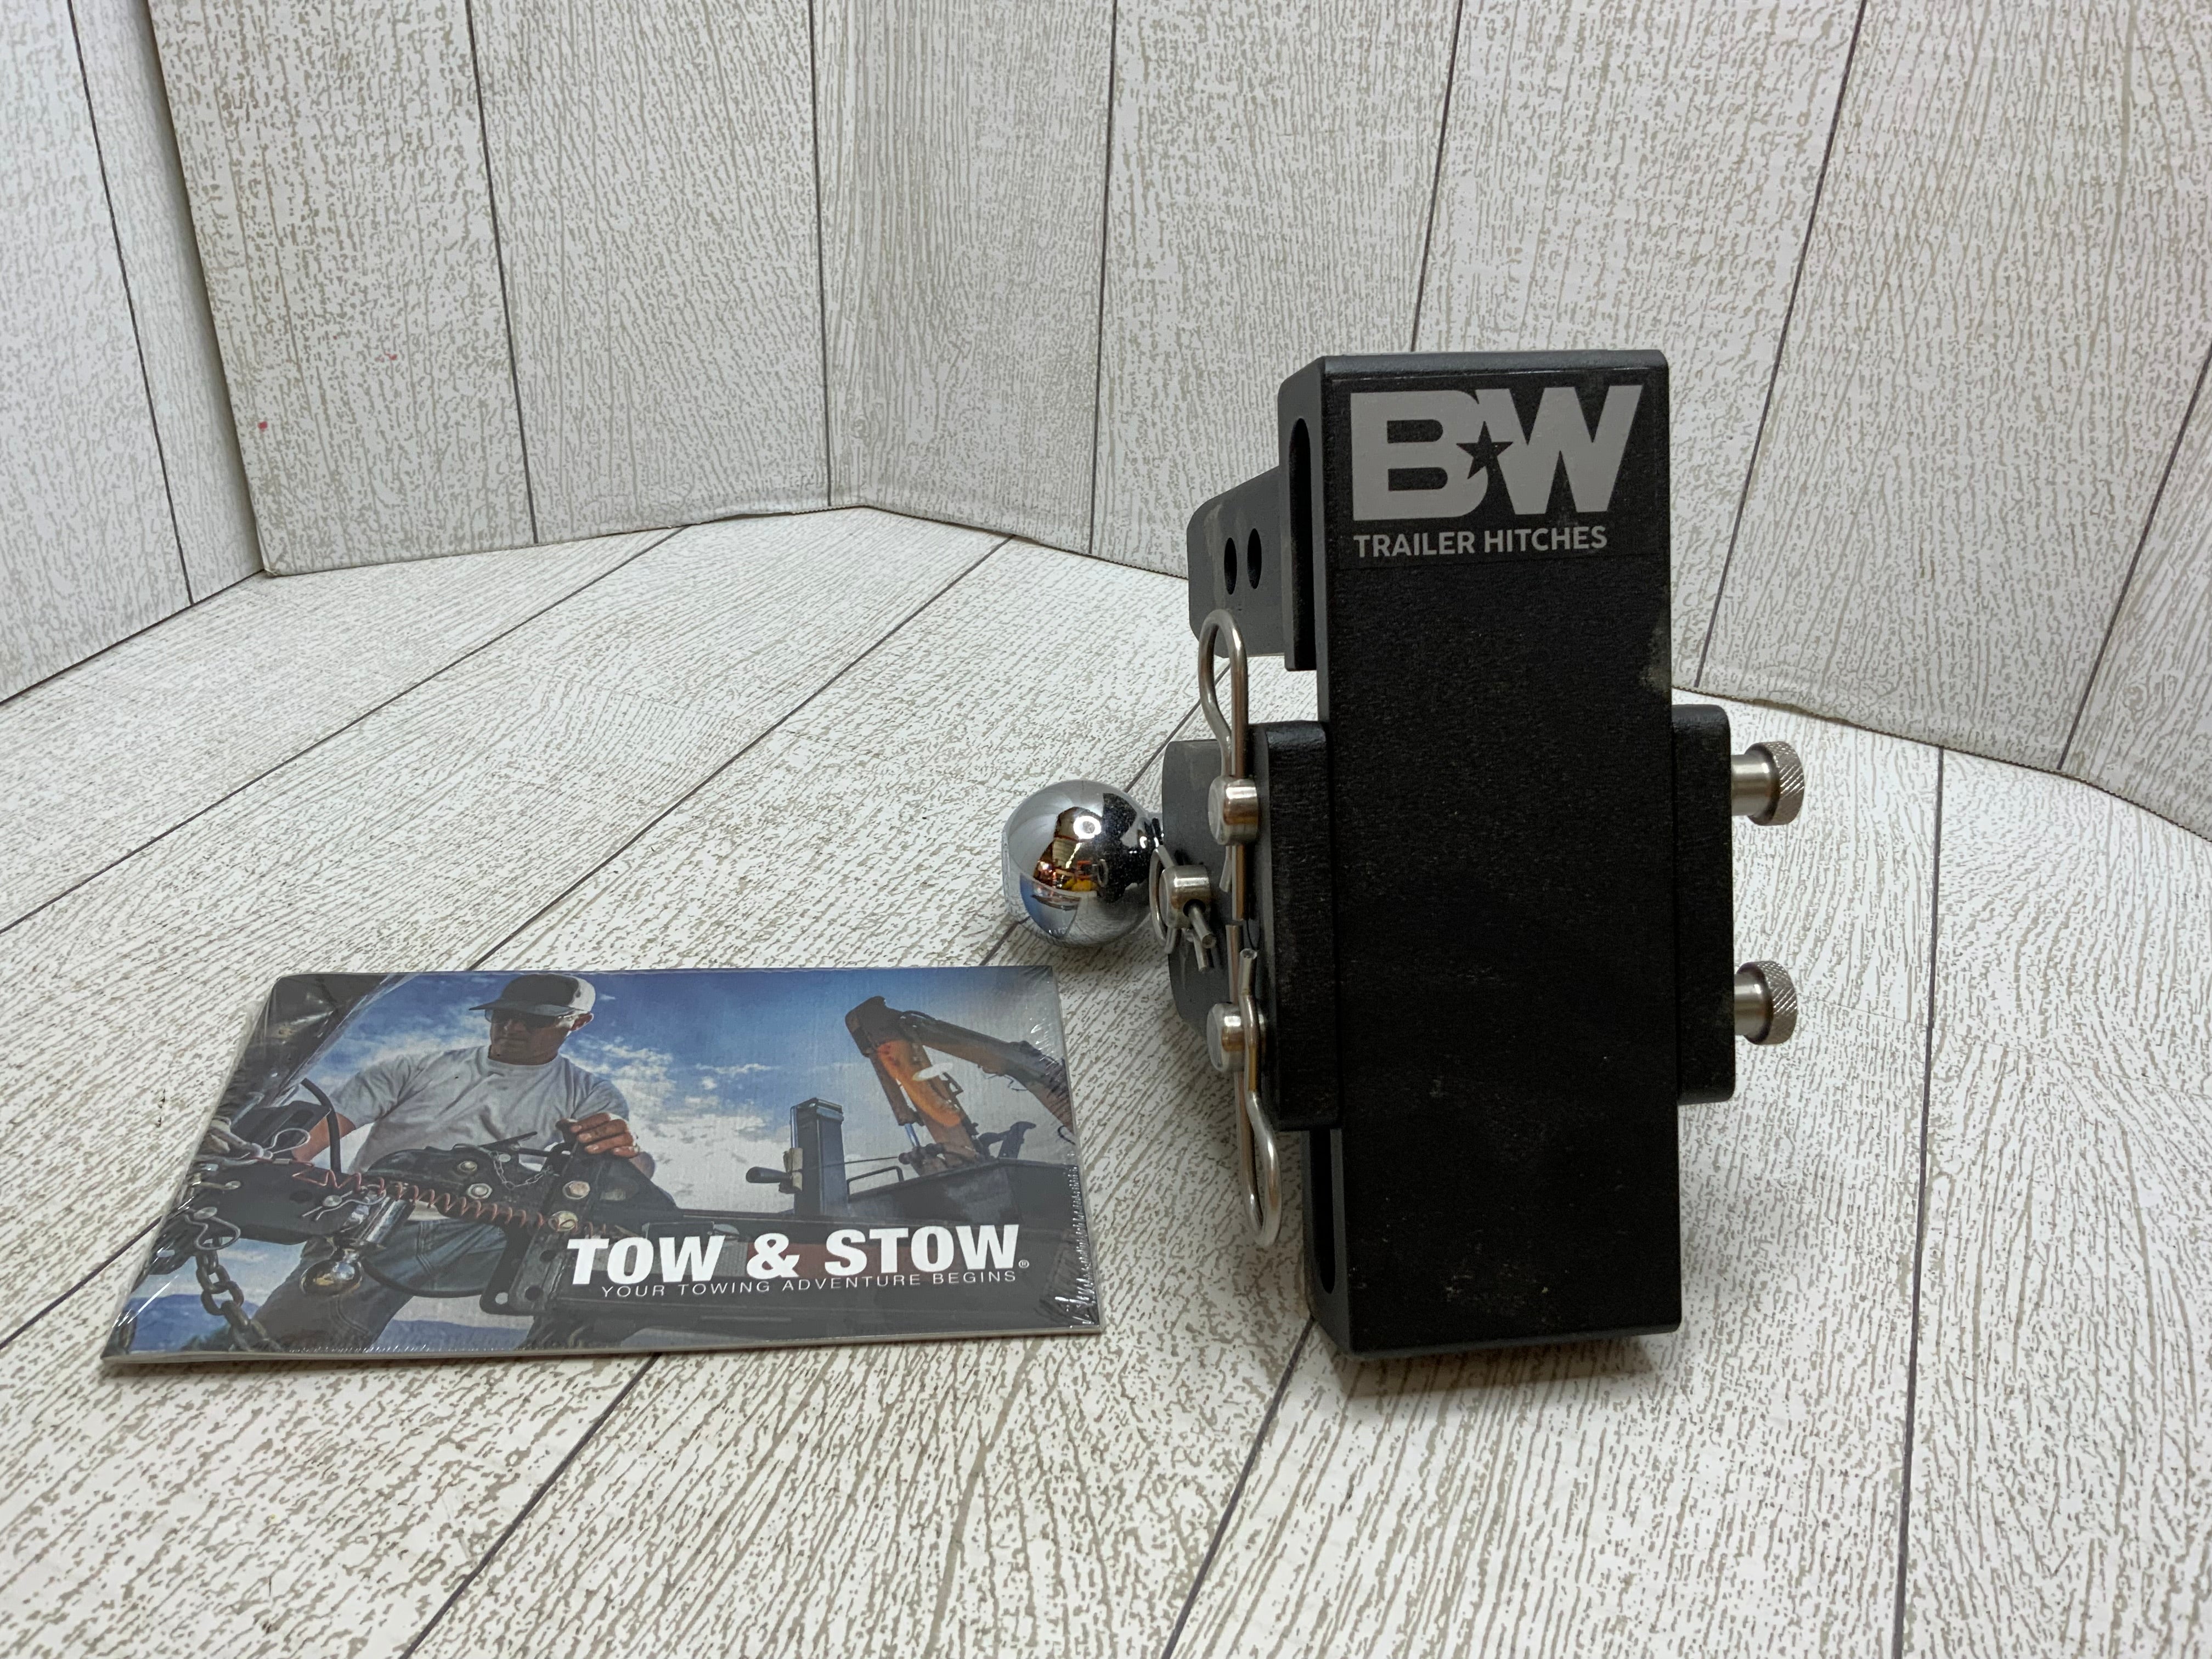 B&W Trailer Hitches Tow & Stow Adjustable Trailer Hitch Ball Mount 2